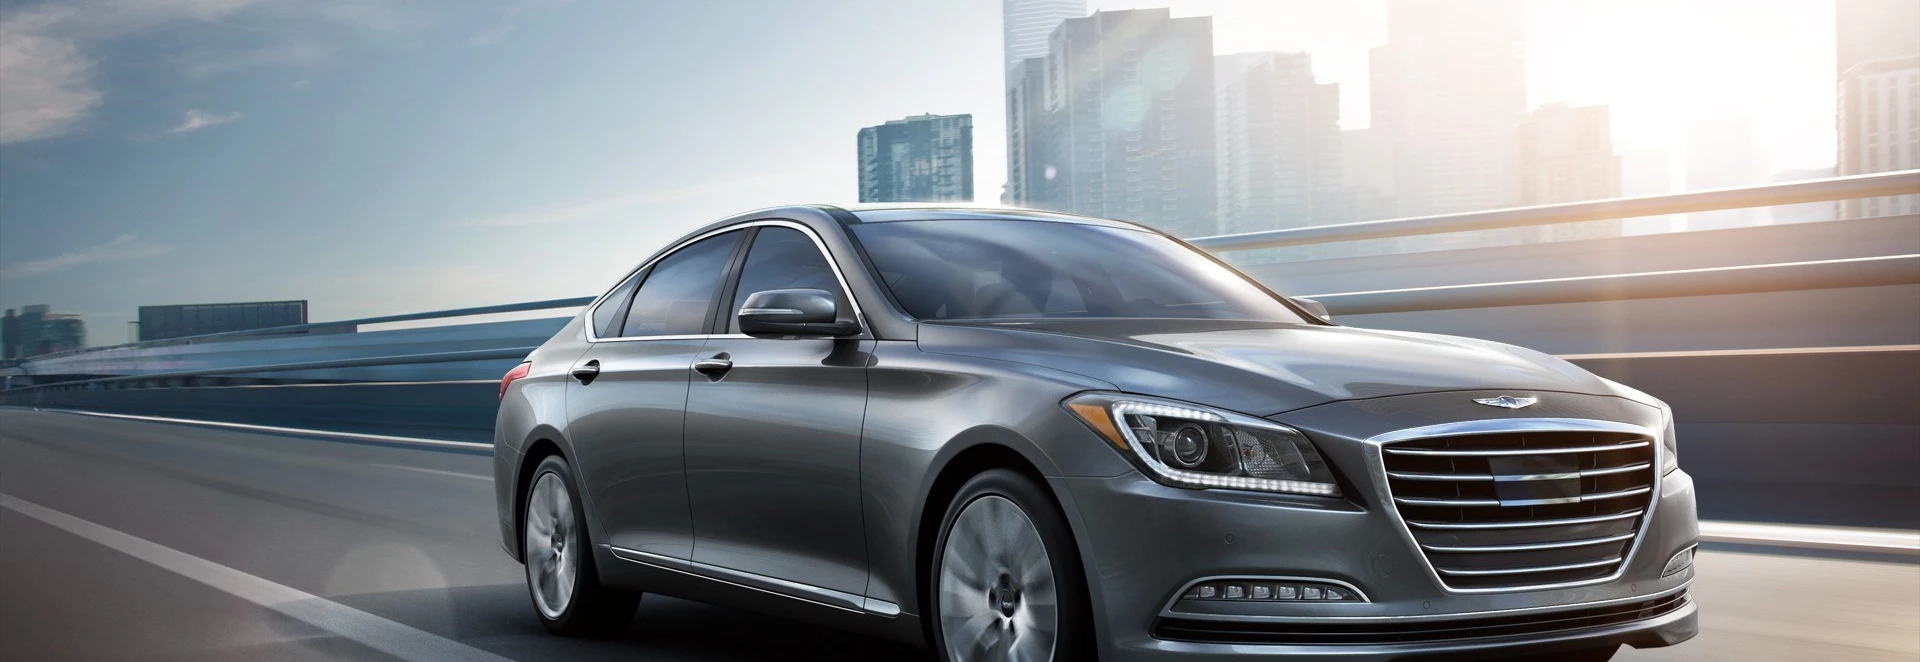 Hyundai Genesis to become a stand-alone luxury brand